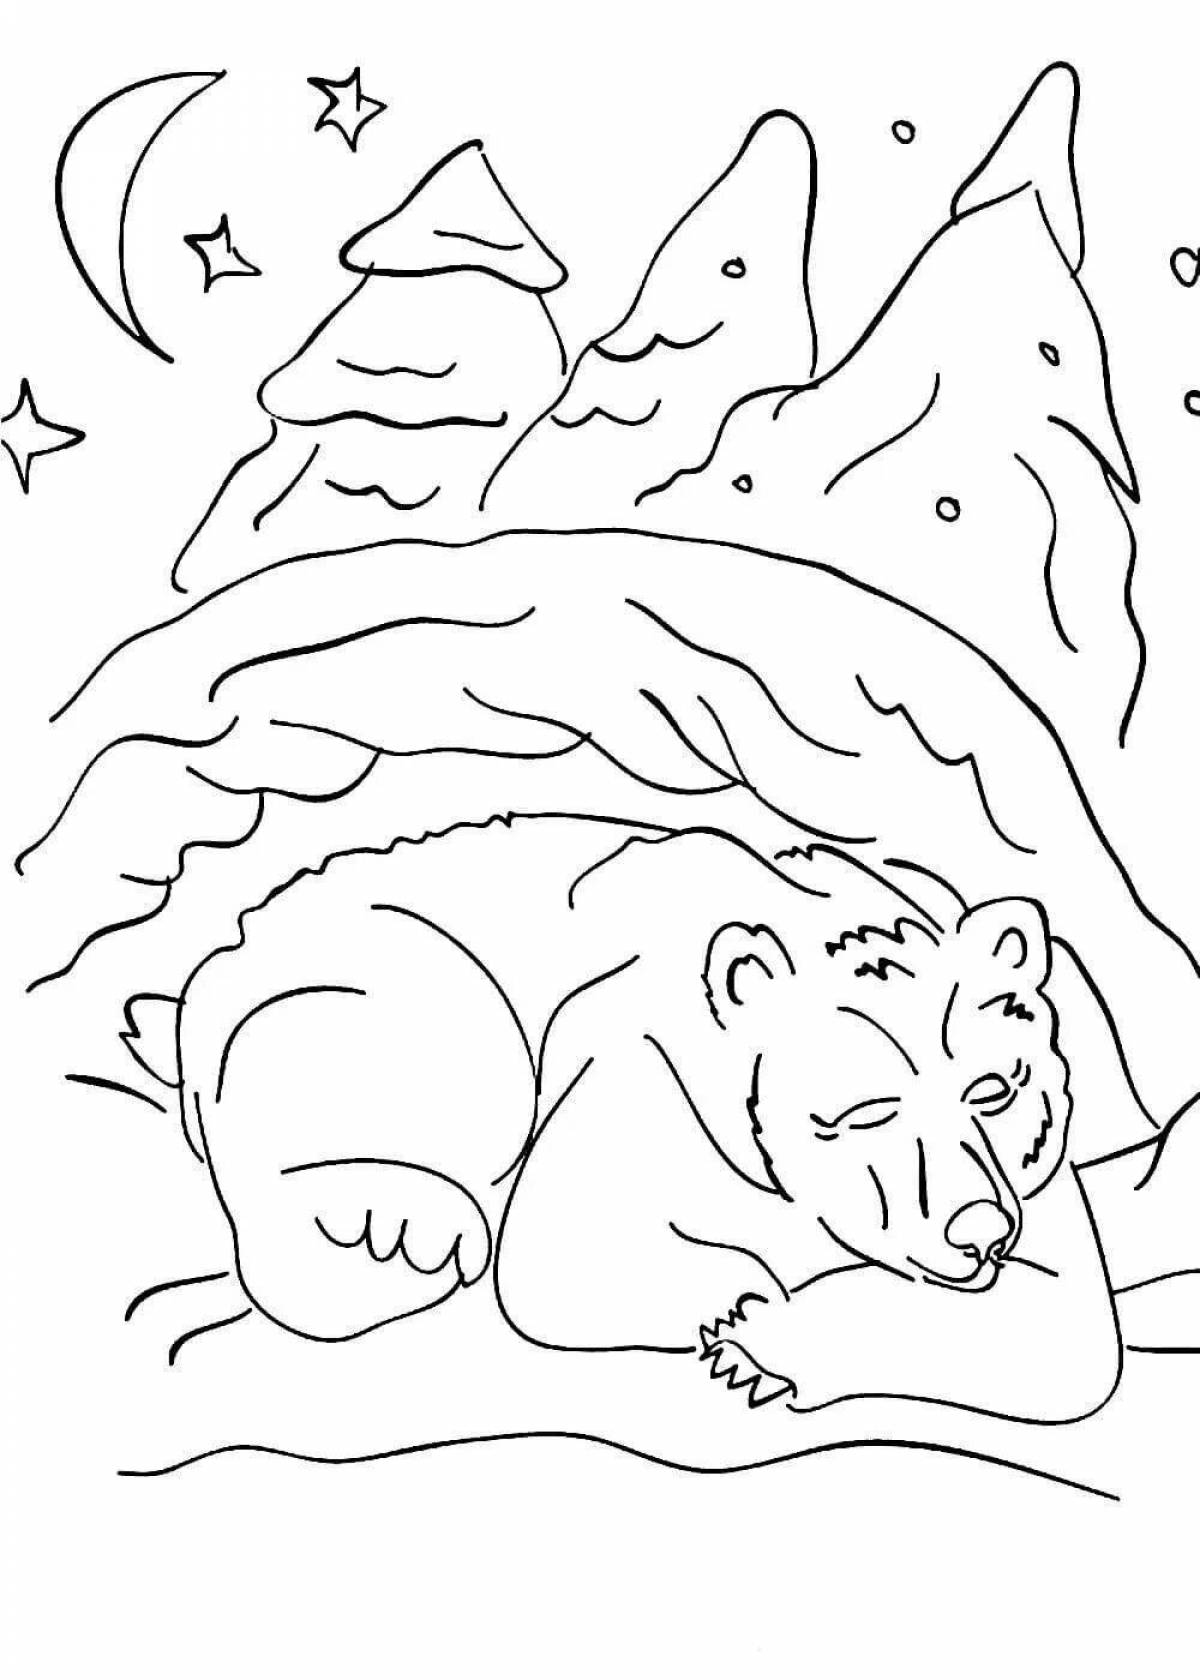 Coloring page blissful winter forest with animals